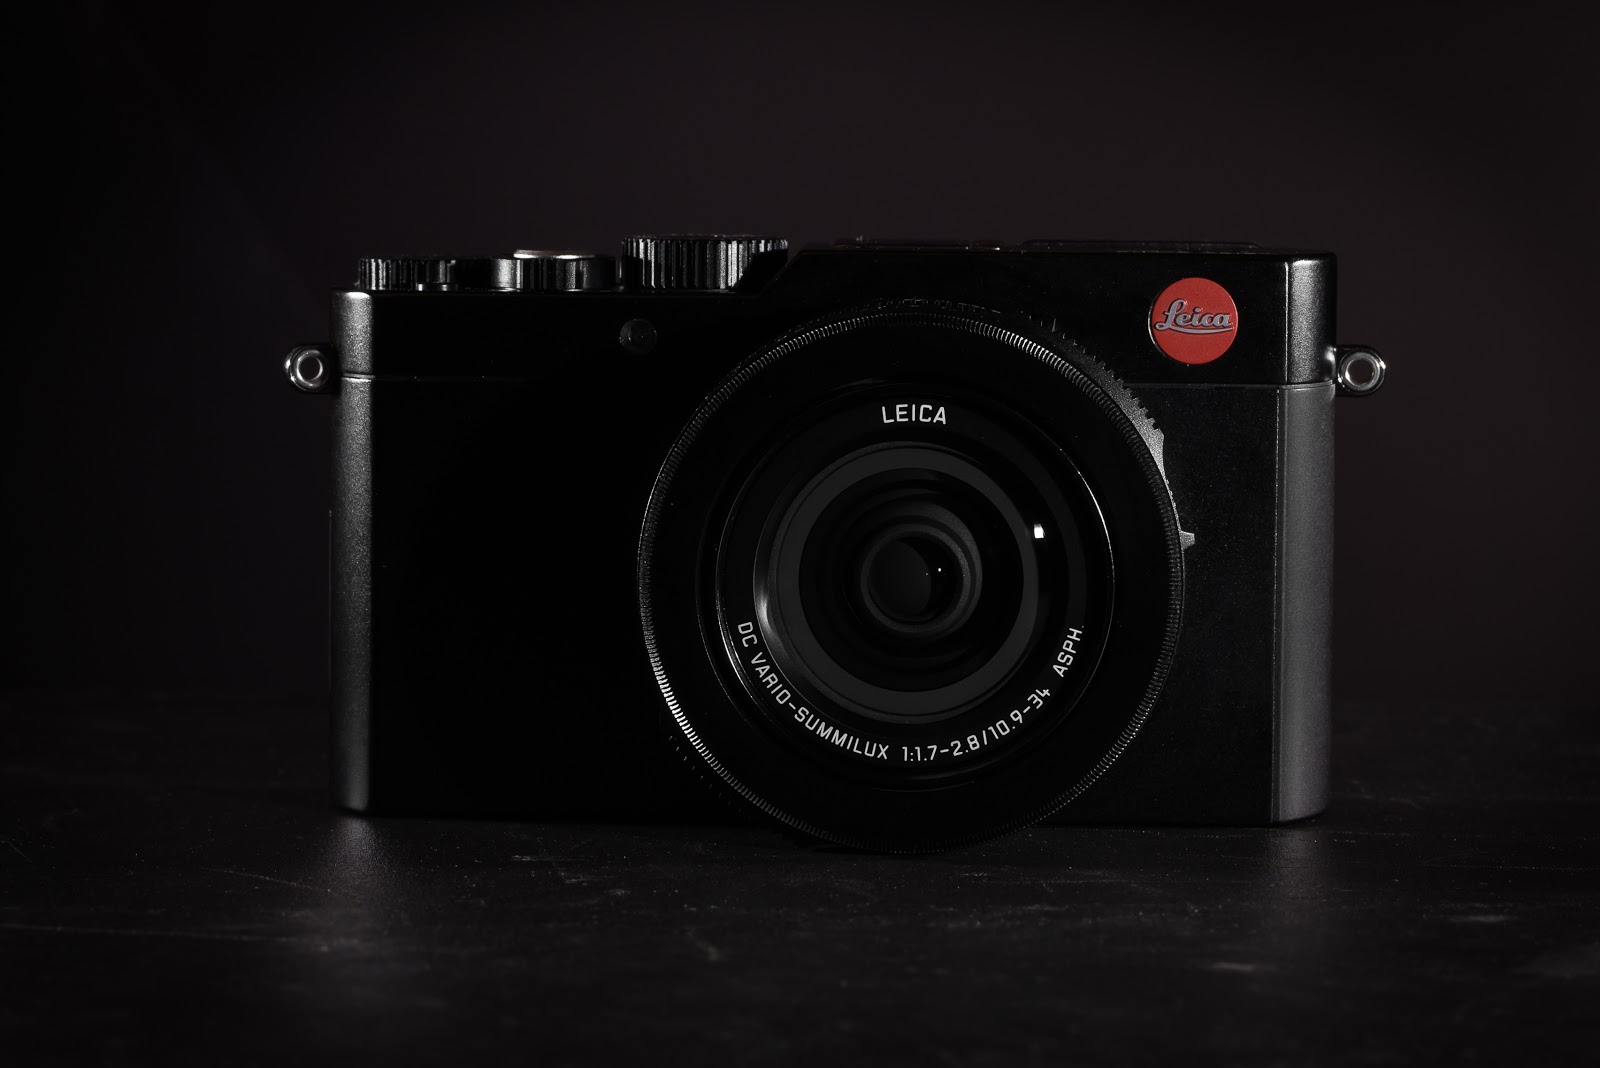 Sample Photos from Leica D-Lux (Typ 109) Camera